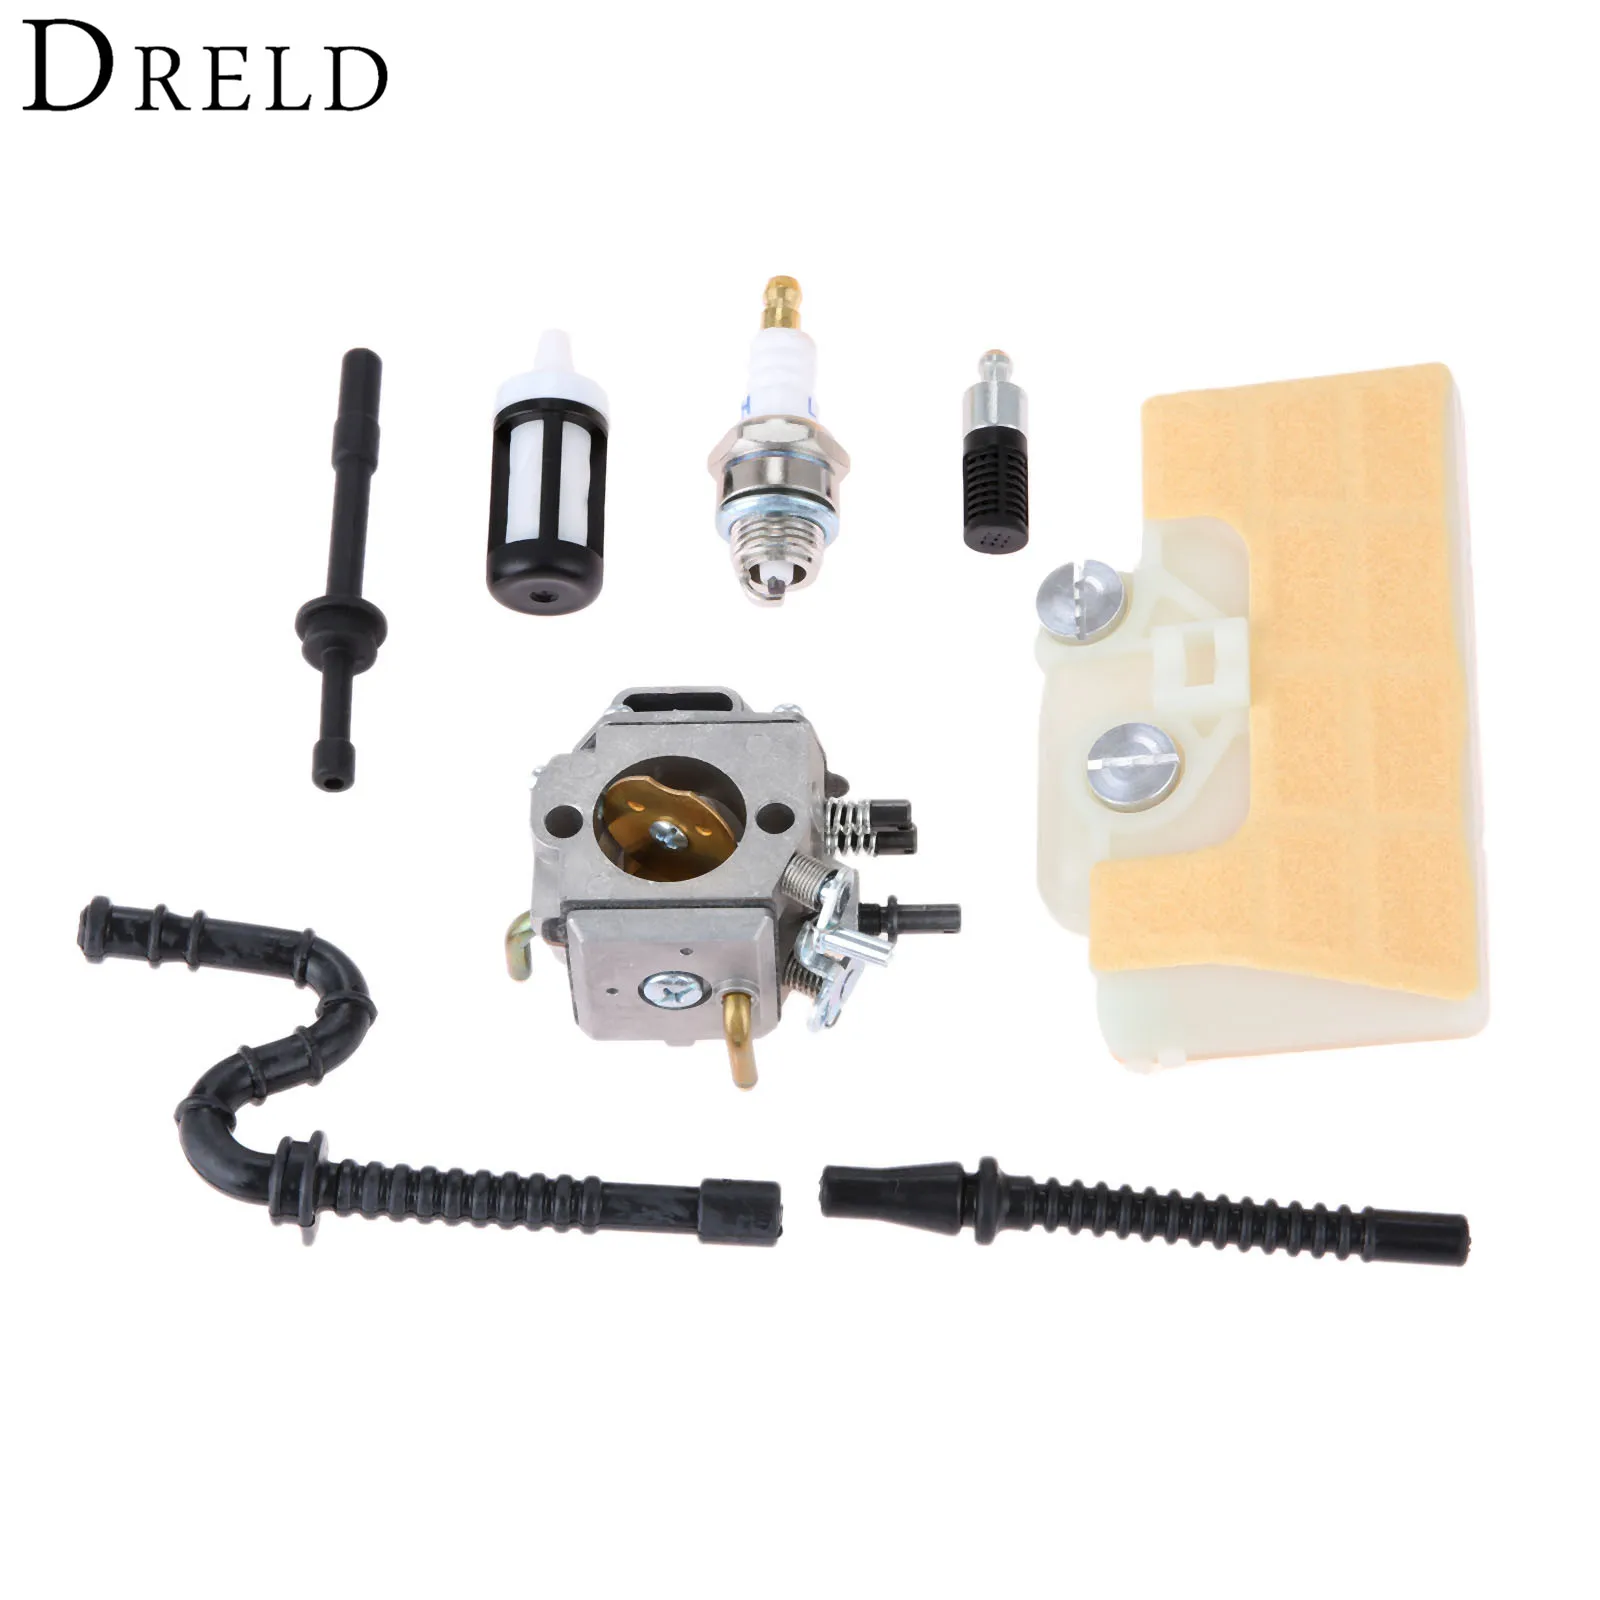 

DRELD Carburetor Carb with Air Filter Fuel Line Spark Plug Repower Kit for STIHL MS290 MS310 MS390 029 039 Chainsaw Garden Tools